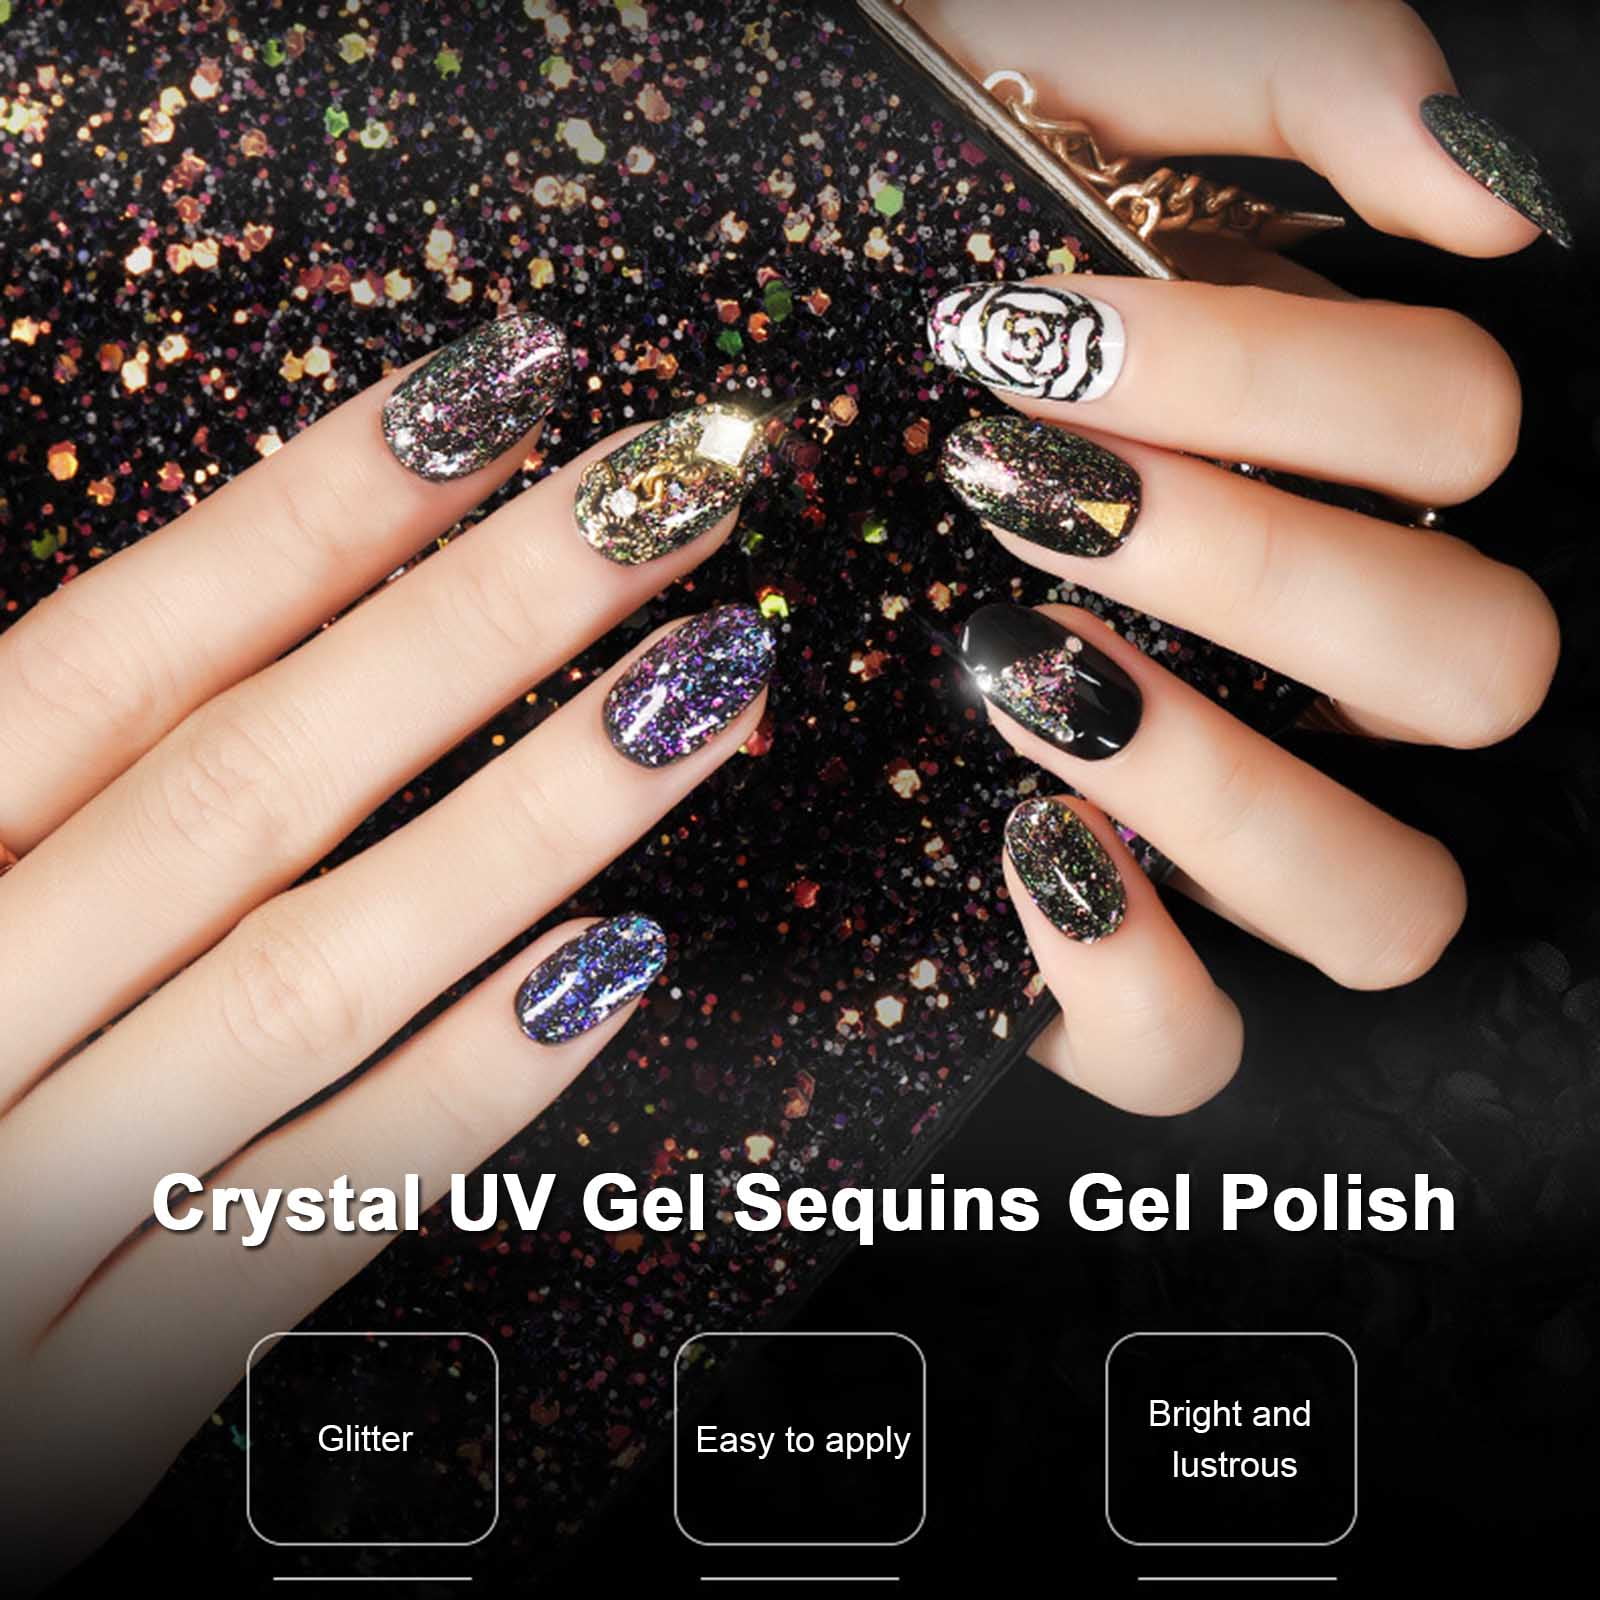 Glass Nails Are The Clear Way To Add Shimmer And Shine To Your Next Mani